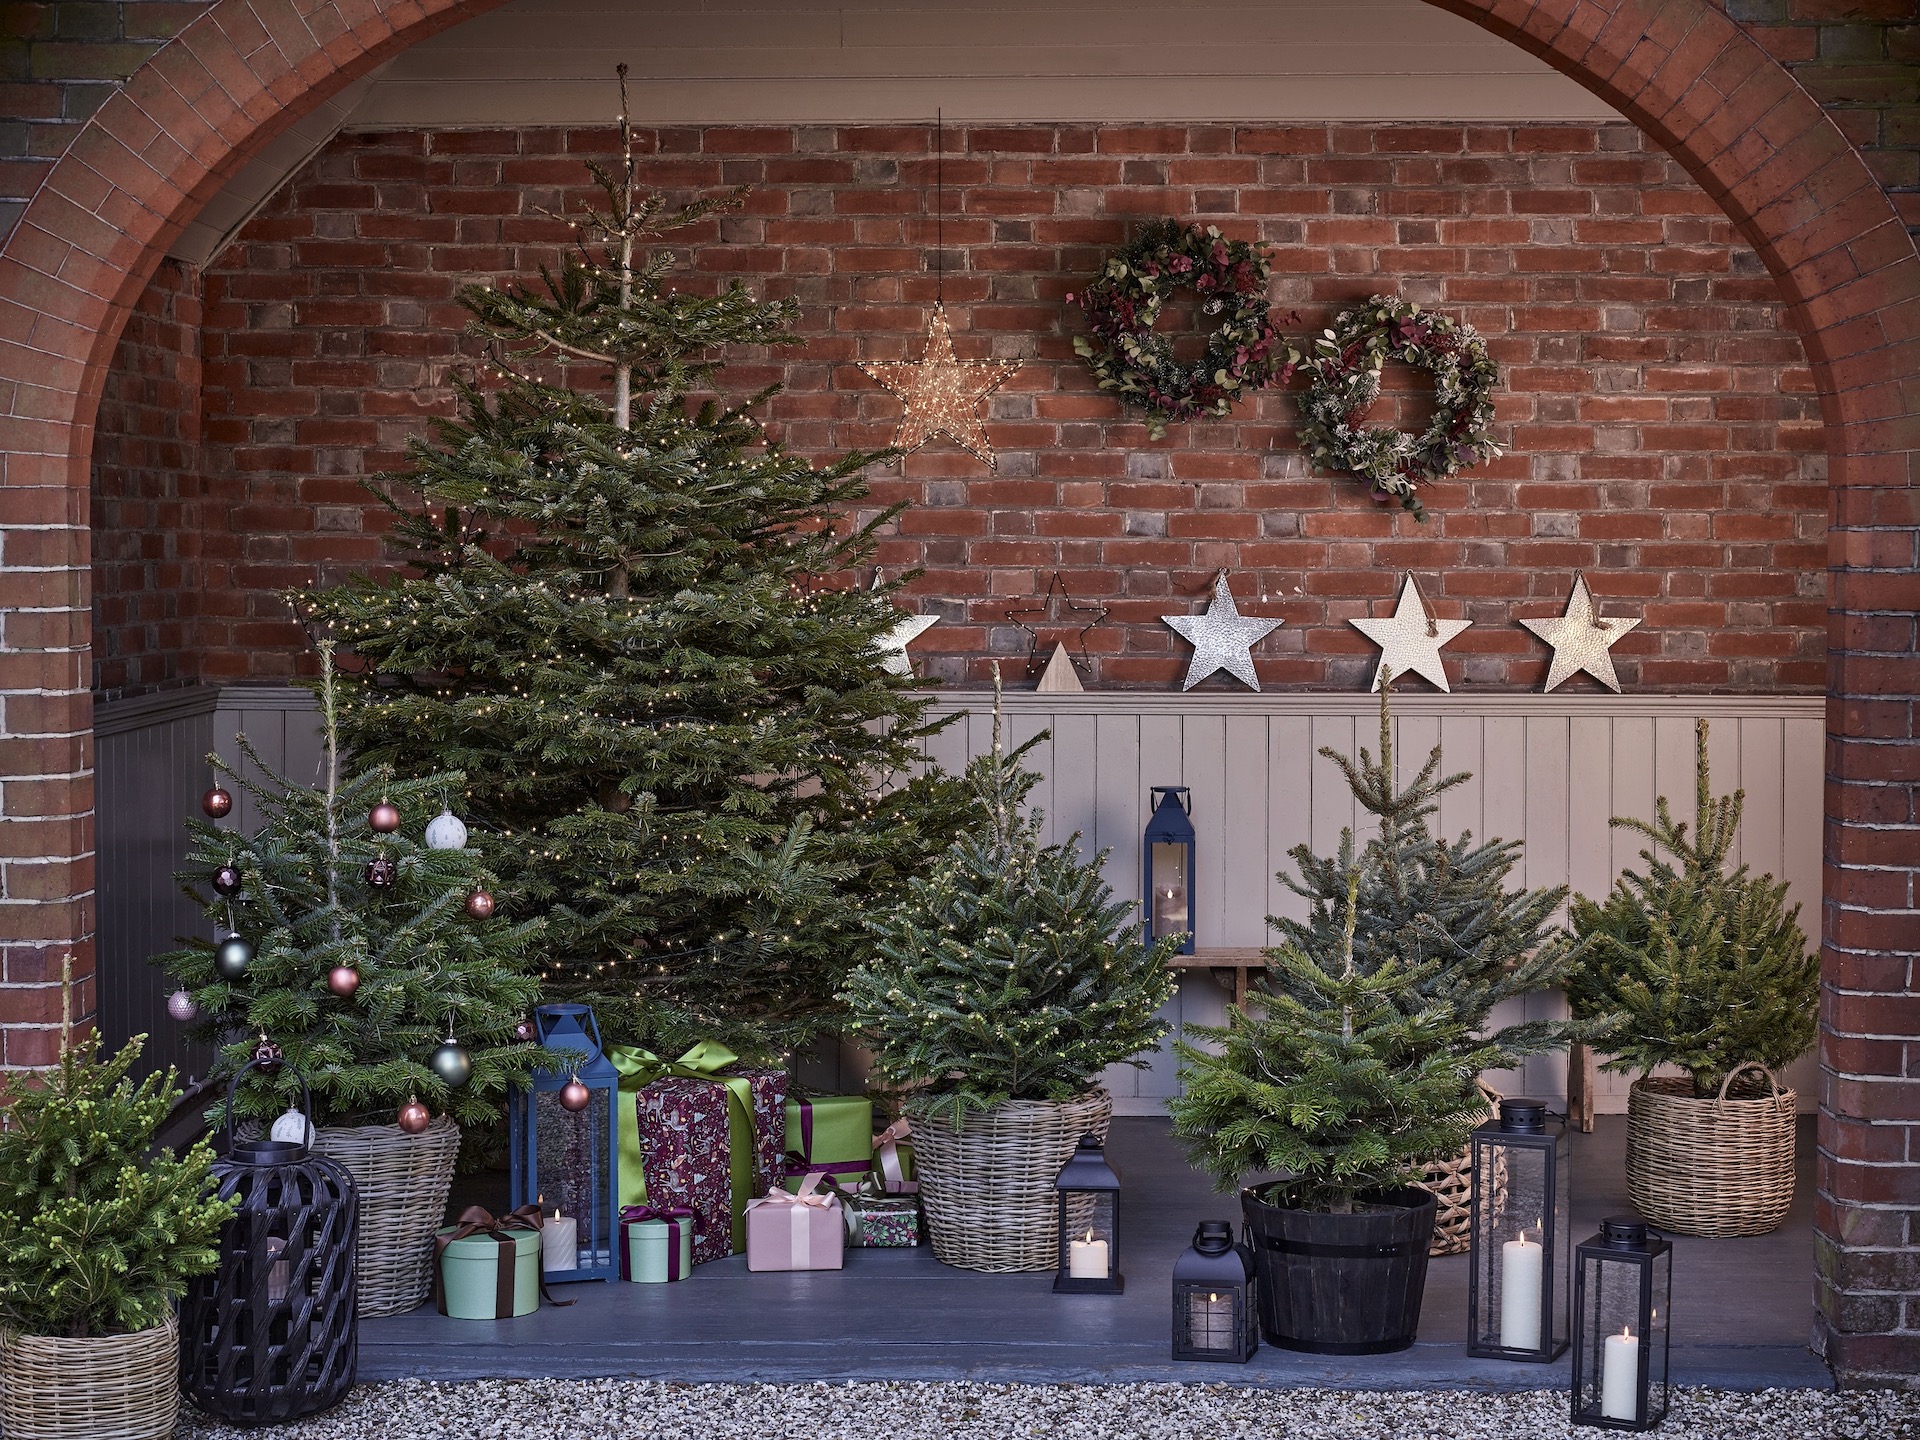 Collection of real Christmas trees from Dobbies in front of brick porch